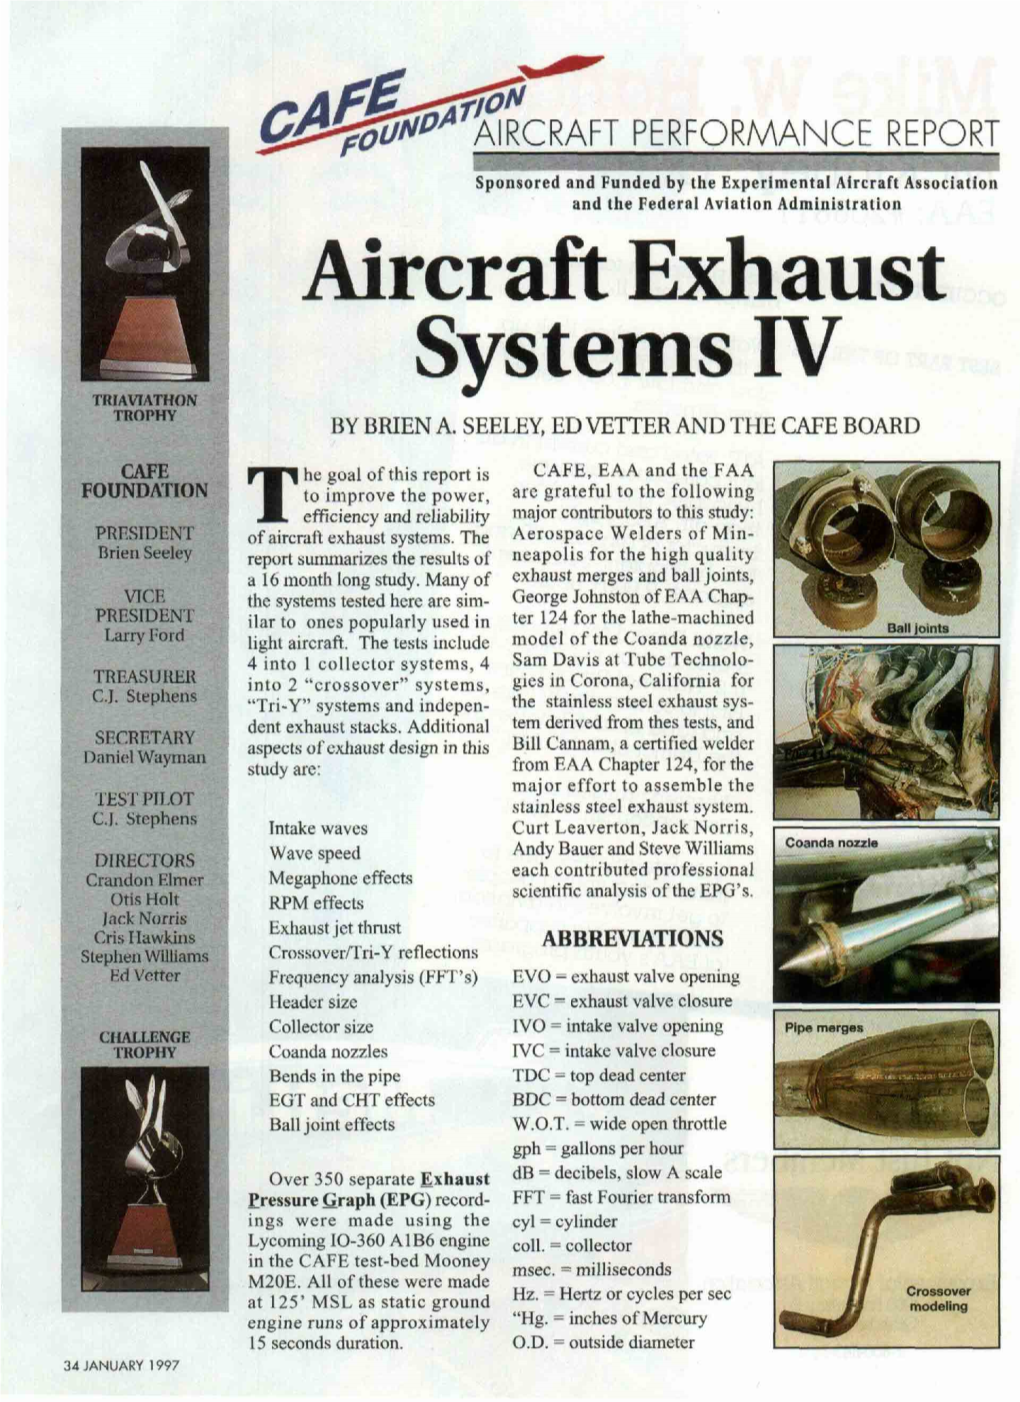 Aircraft Exhaust Systems IV" (January Memphis Would Be 32.1435